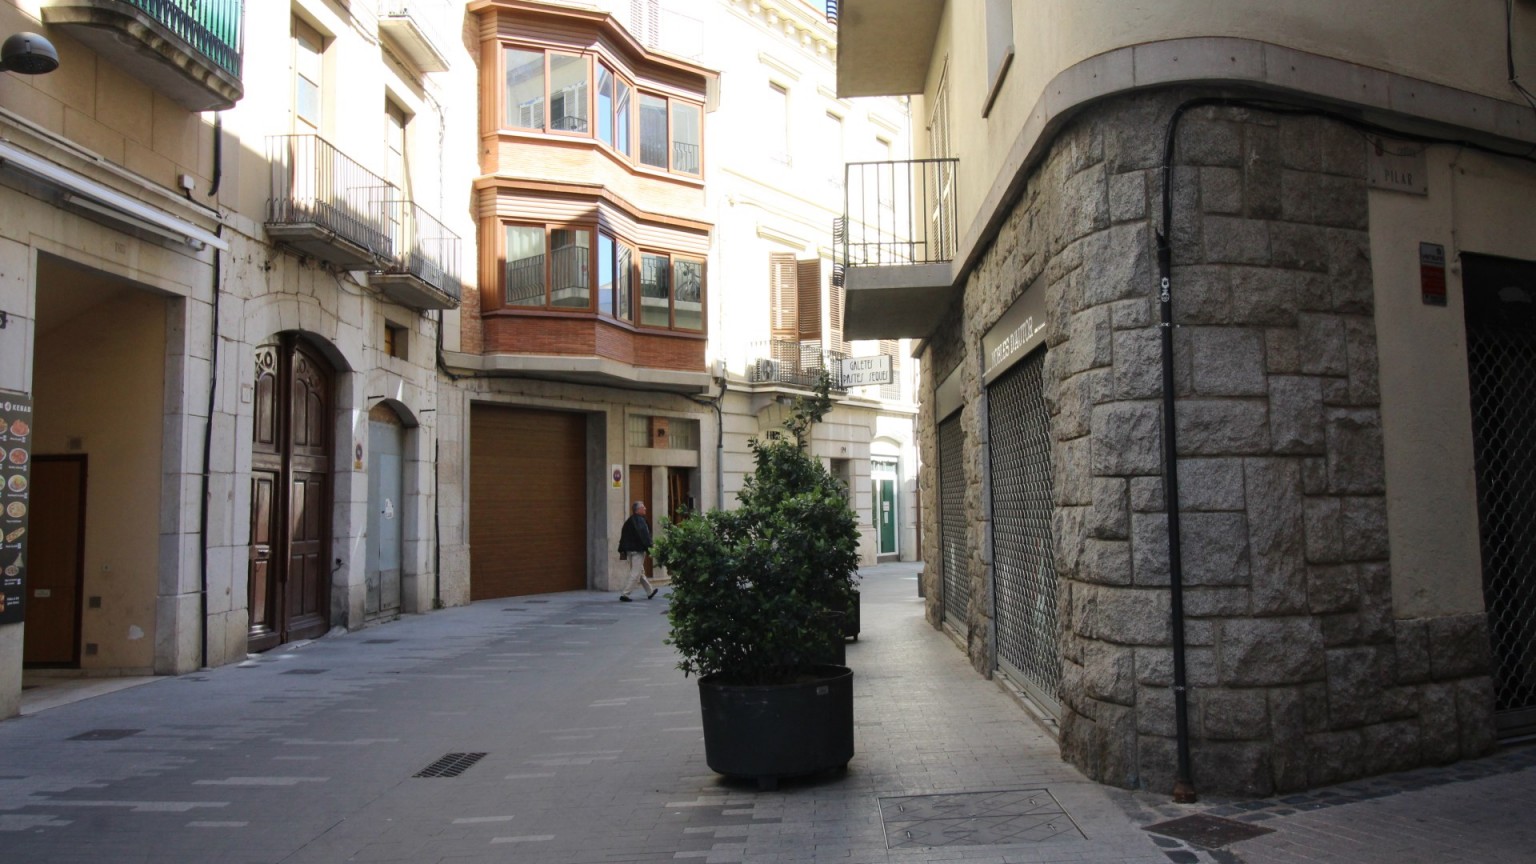 Premises for rent, in the centre of Figueres. 